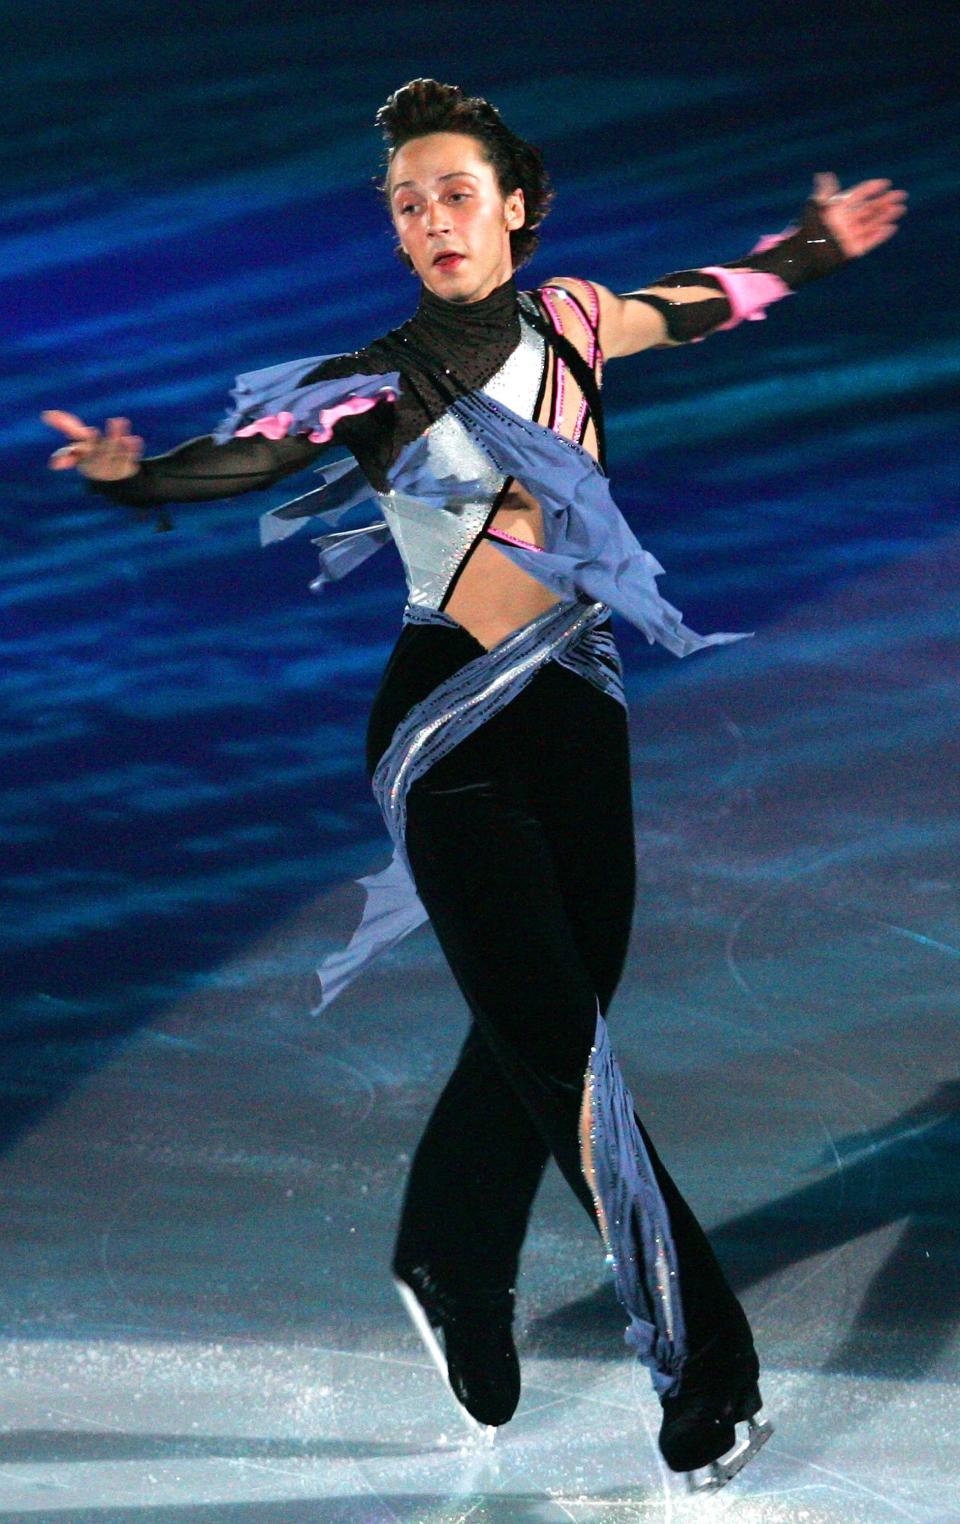 Performing in an exhibition program during the International Counter Match Figure Skating Competition, USA vs. Japan, at the Shin-Yokohama Prince Hotel Skate Center on Oct. 7, 2007, in Yokohama, Japan.